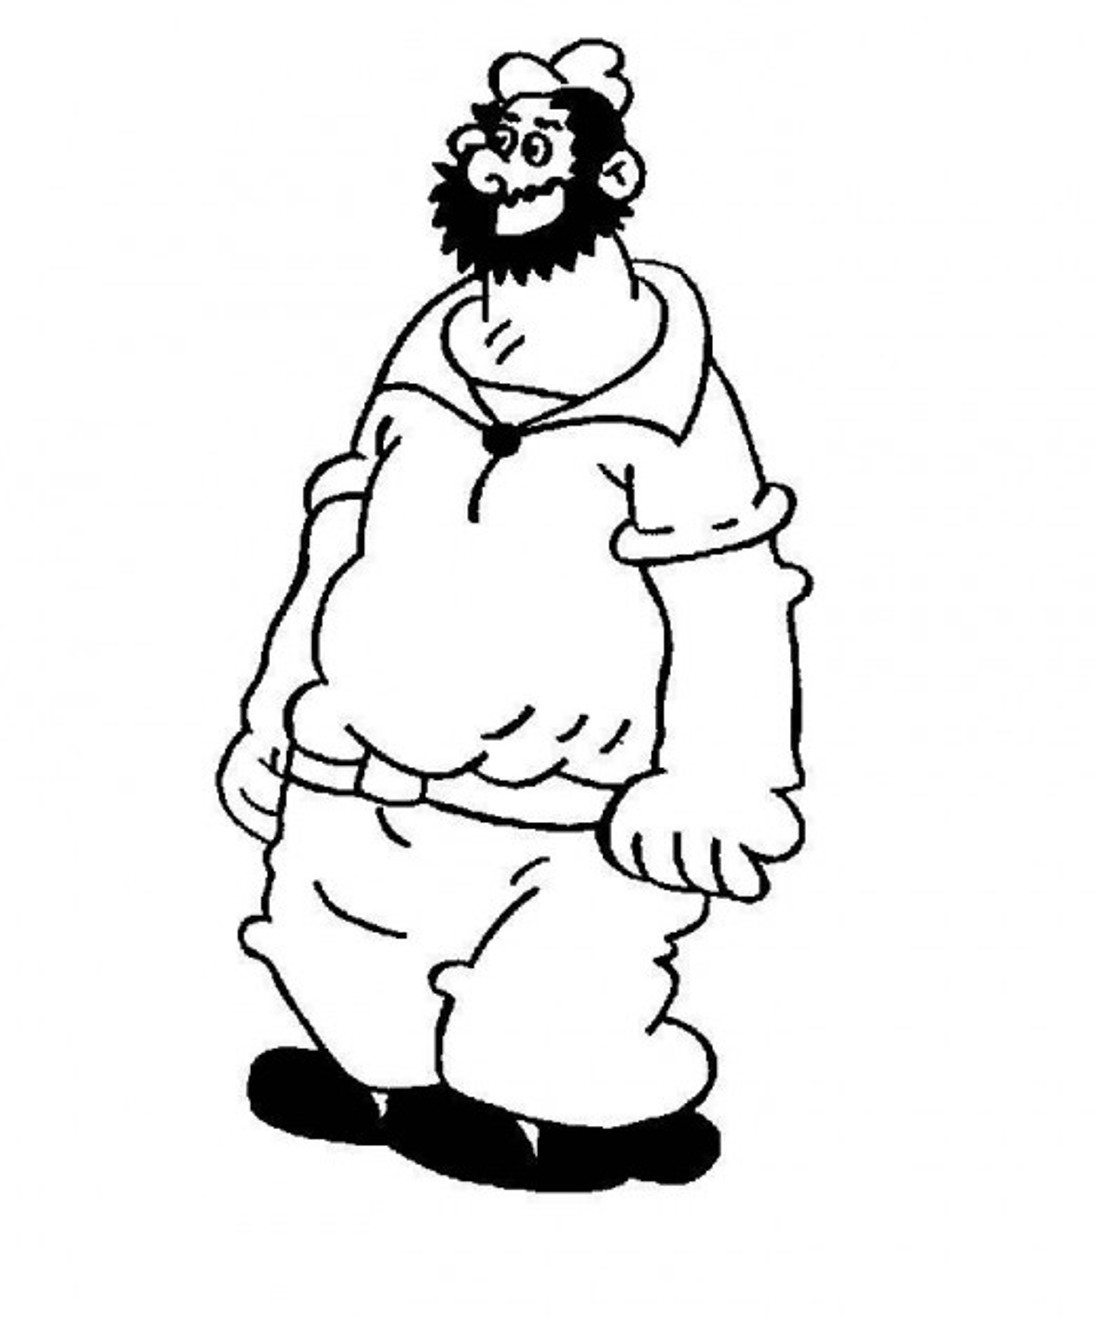 Popeye Coloring Pages Bluto | Cartoon Coloring pages of ...